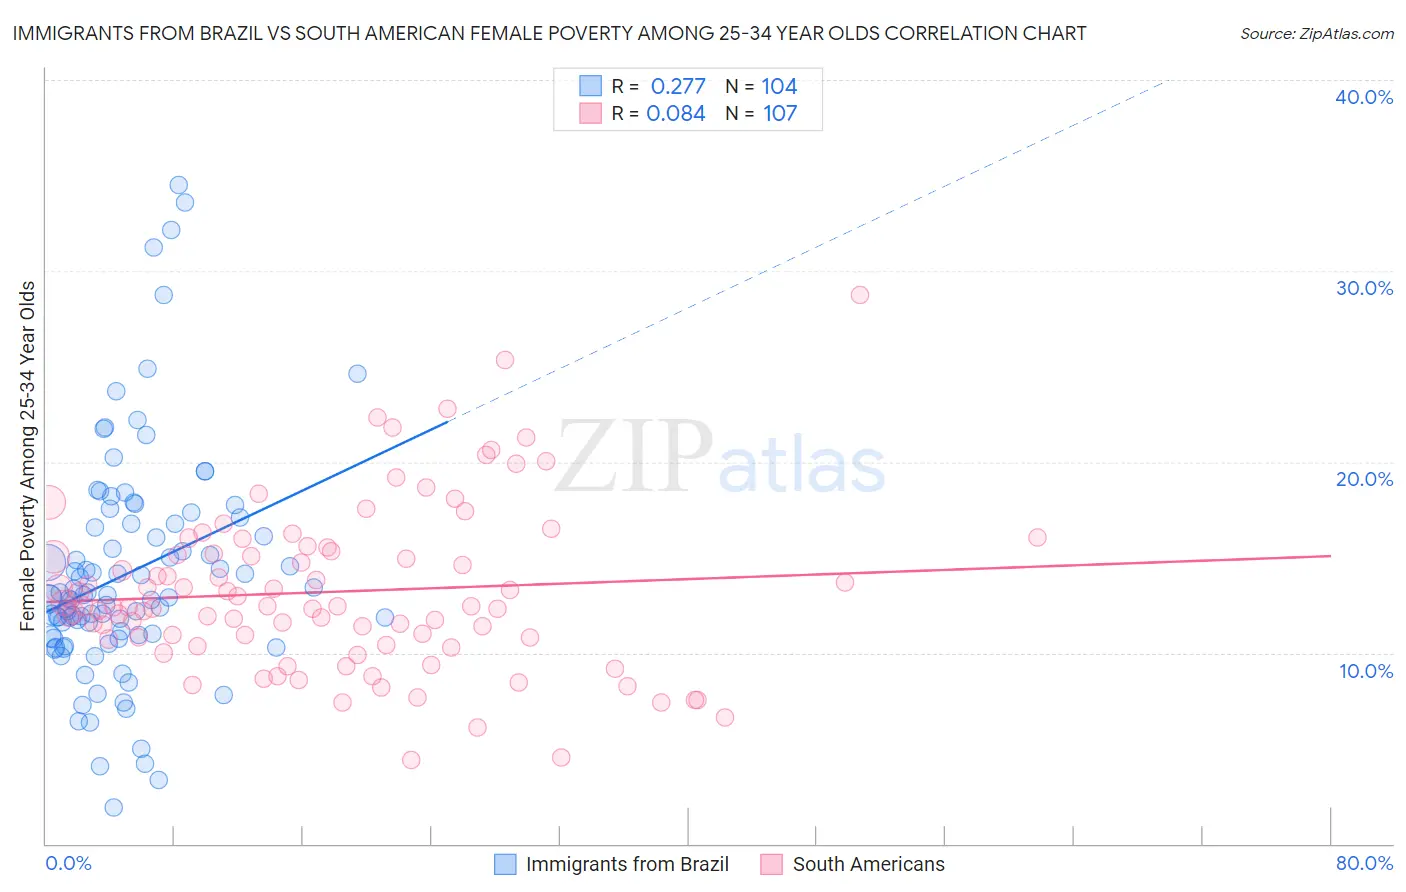 Immigrants from Brazil vs South American Female Poverty Among 25-34 Year Olds